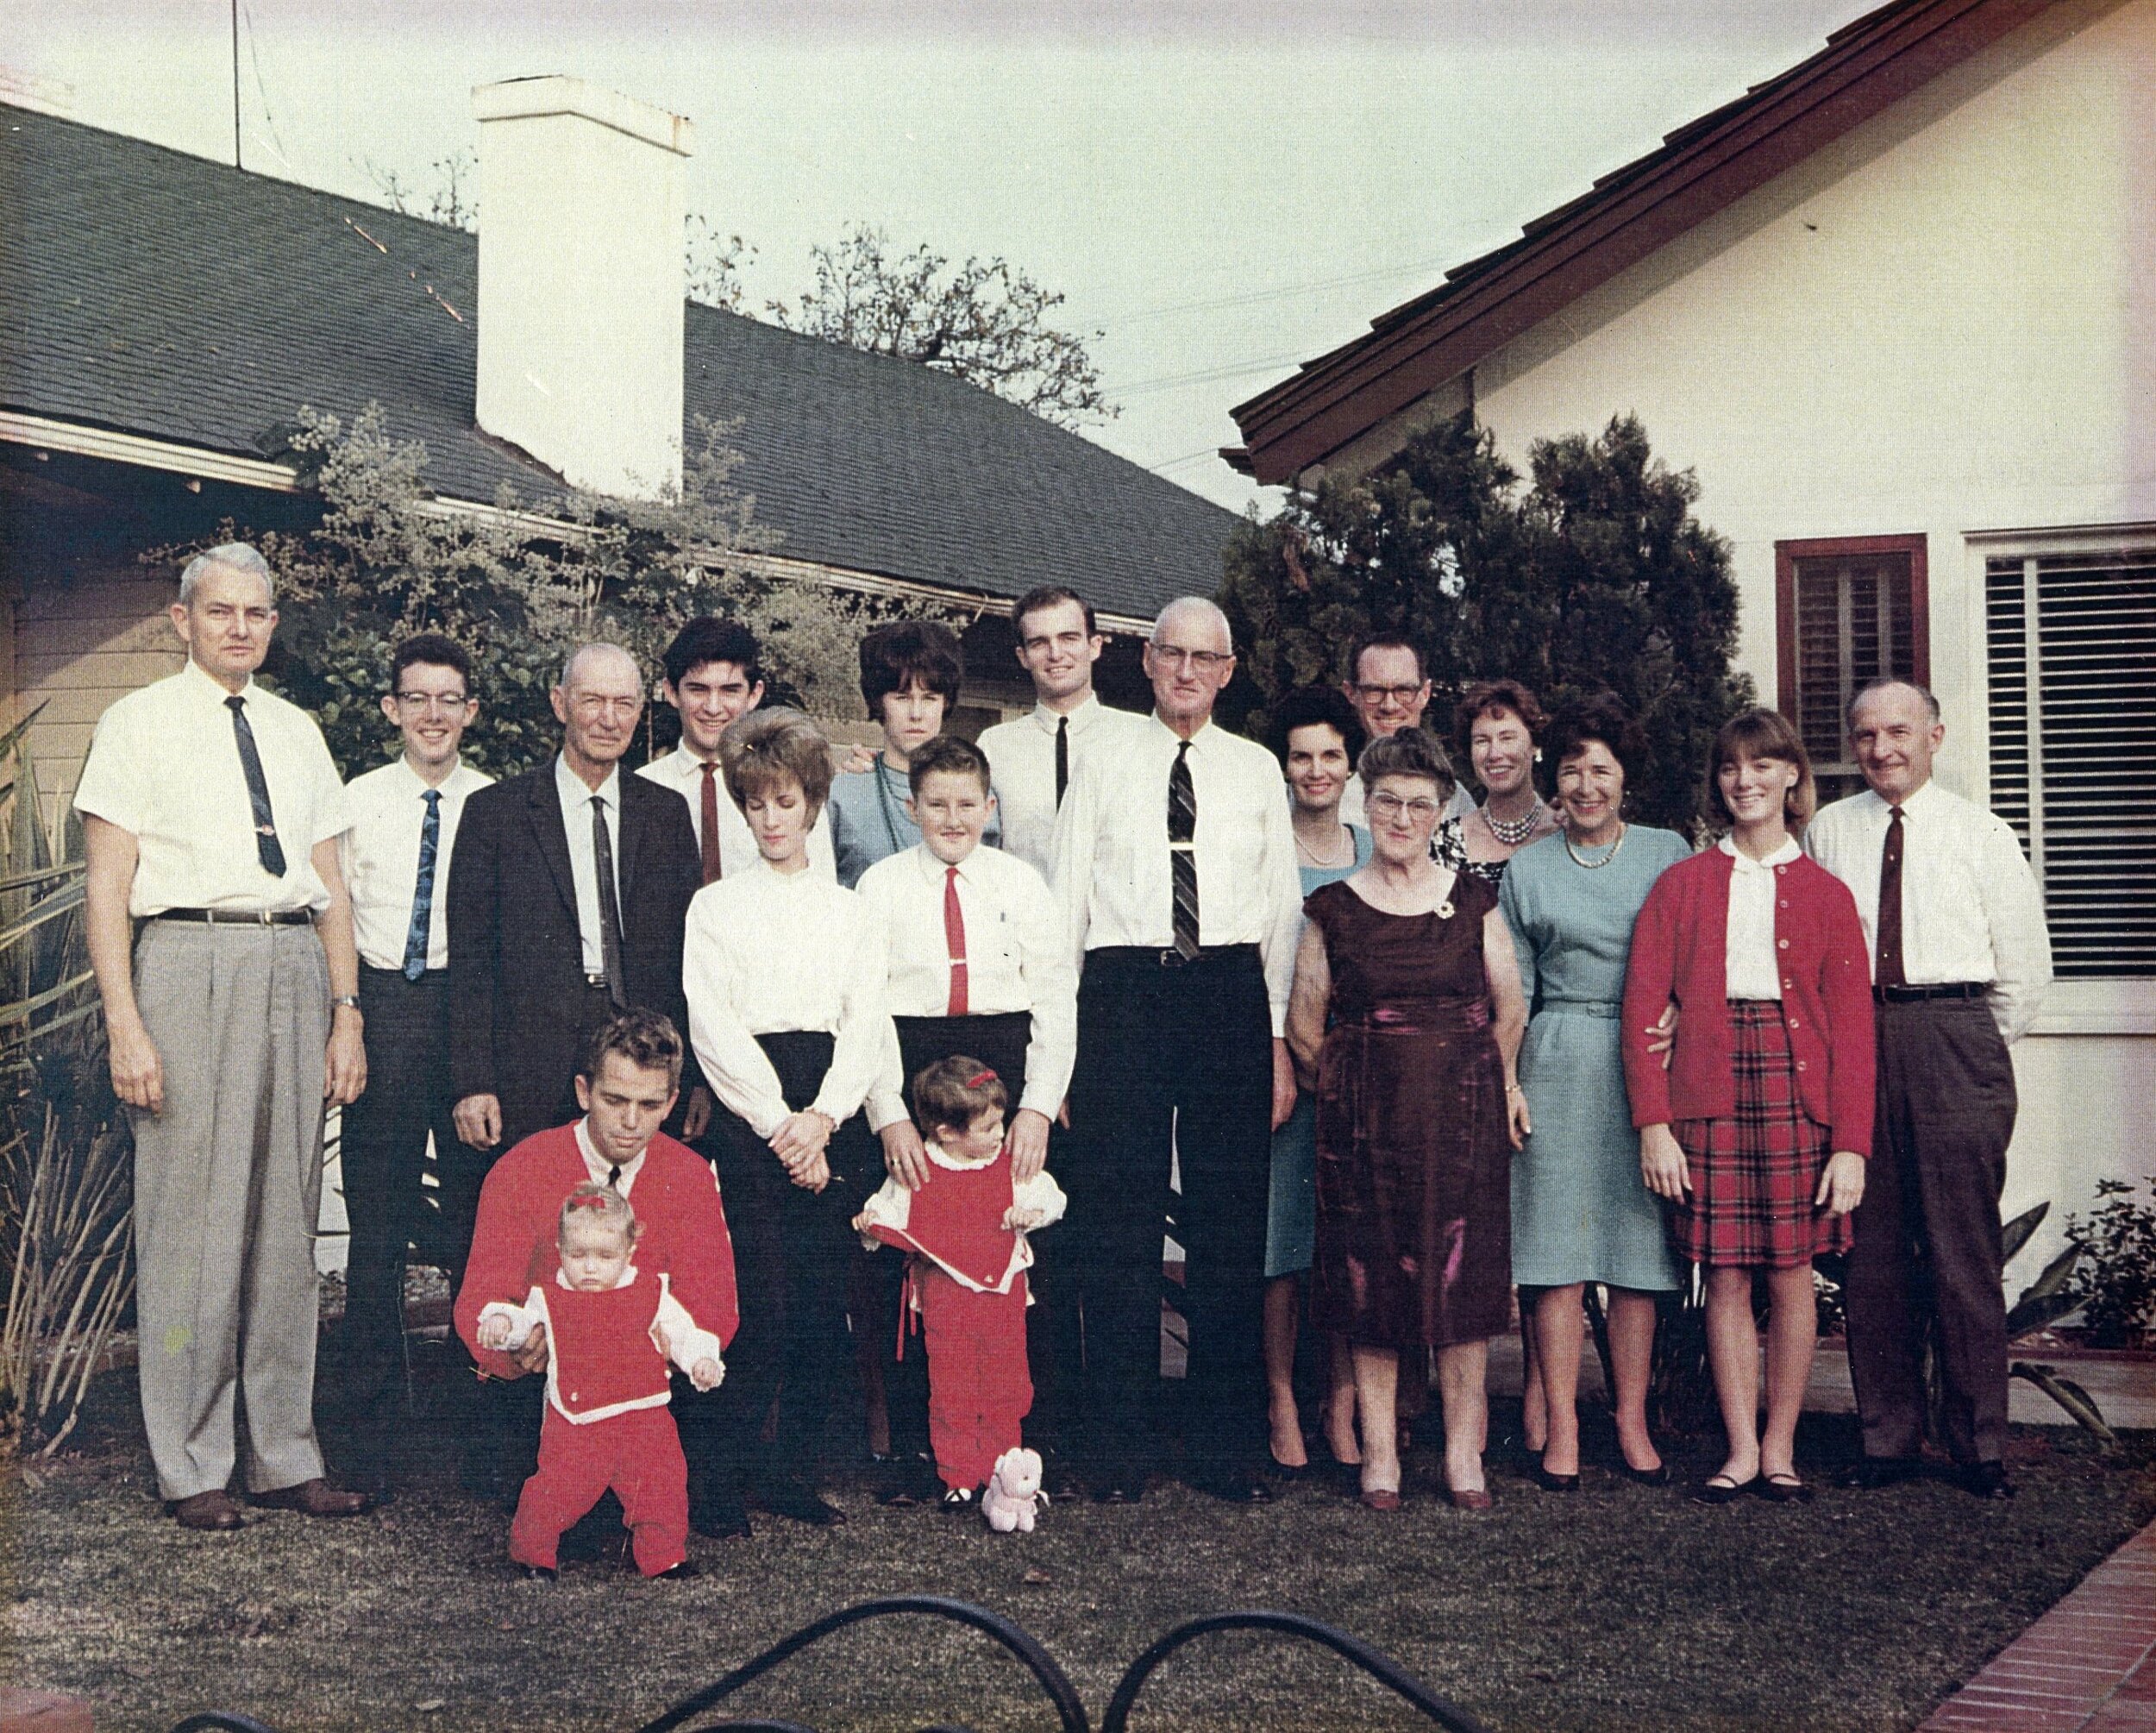  Christmas 1964 at Francis Home, Pasadena  Back Row (l-r): Sandy Robins (husband of “Fran”); Larry Robins (older son of “Fran” and Sandy); Captain Jeans (Betty Jeans Francis’ father); Louis (possibly Luis) Gorostiaga (an exchange student from Paragua